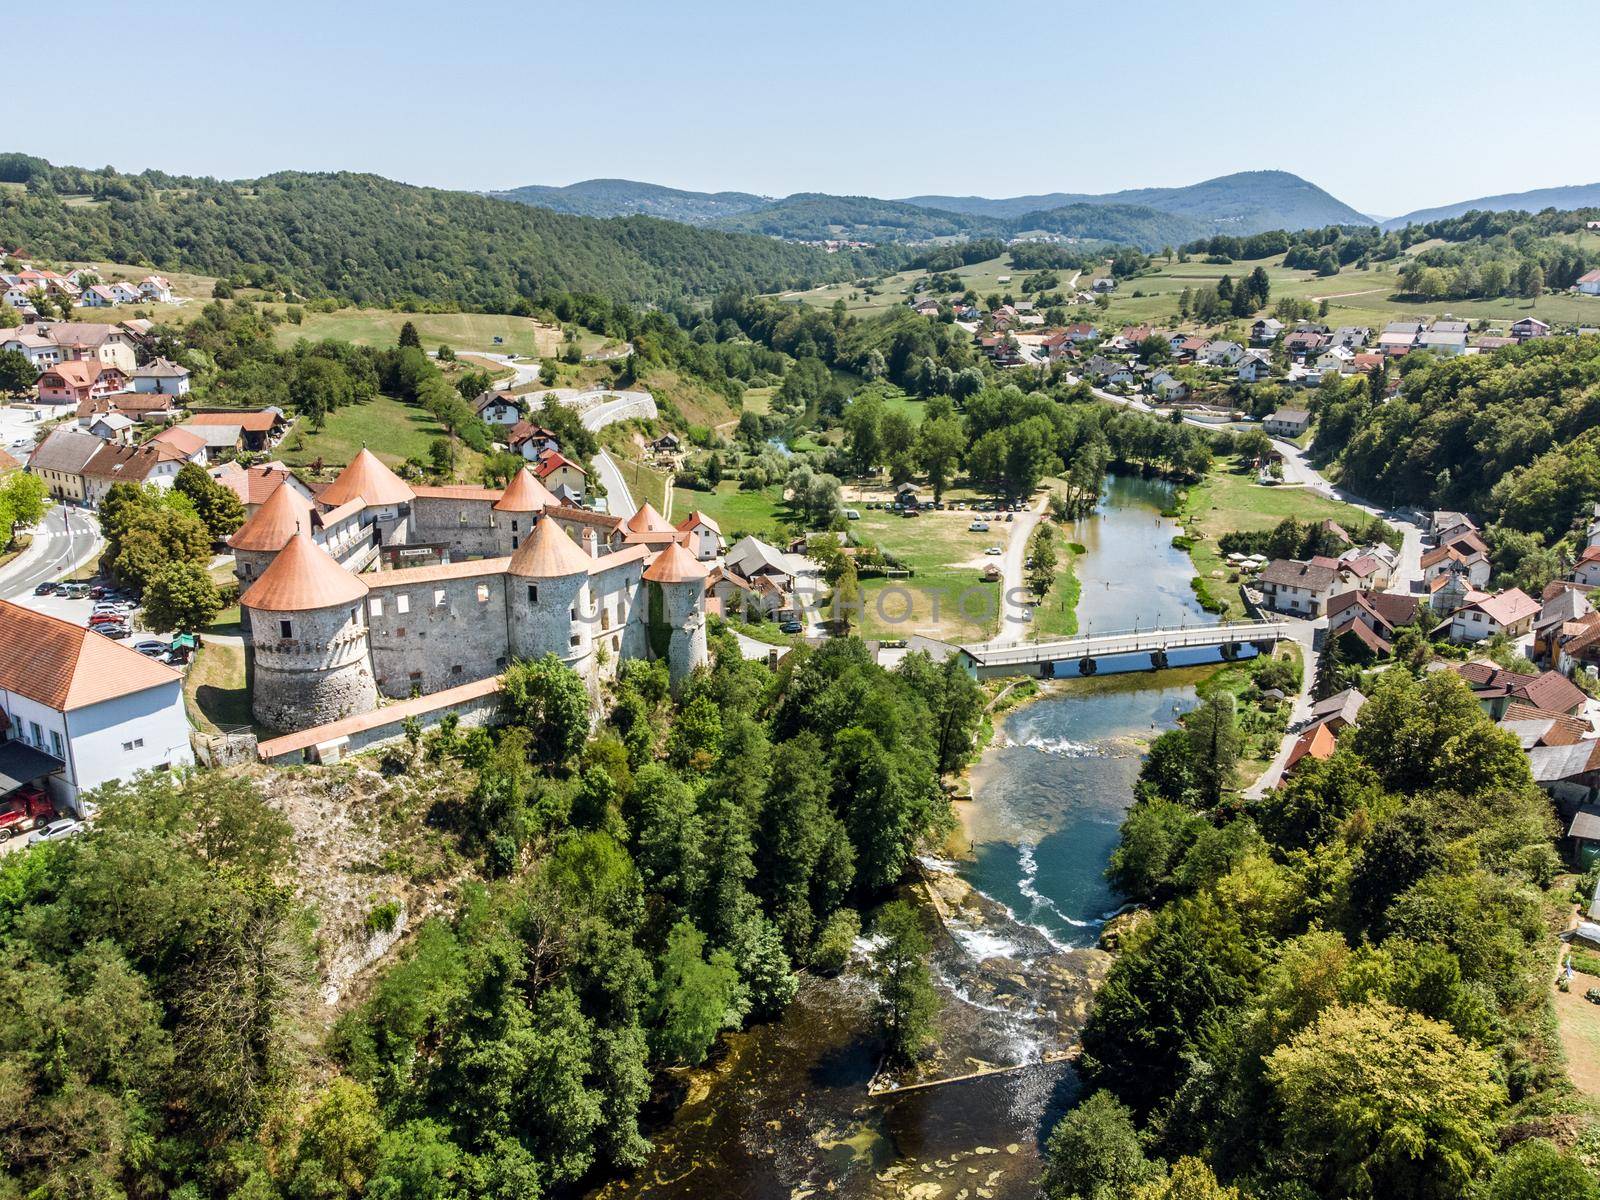 Aerial drone view of Medieval castle of Zuzemberk or Seisenburg or Sosenberch, positioned on terrace above the Krka River Canyon, Central Slovenia. by kasto